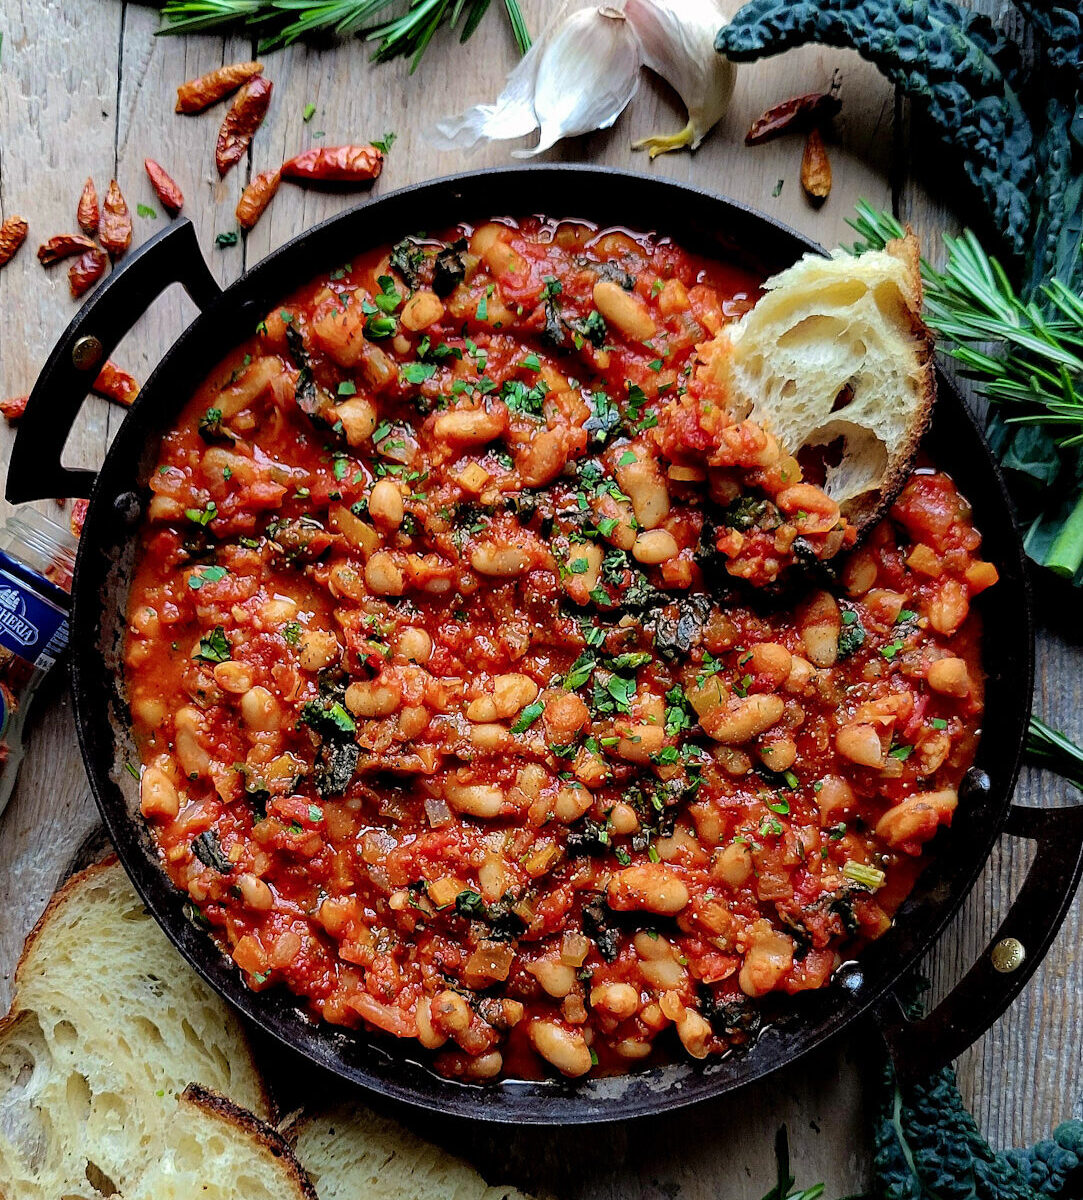 A skillet filled with Tuscan Braised Beans and Kale, with crusty bread to the side, as well as fresh rosemary, garlic cloves and kale leaves.